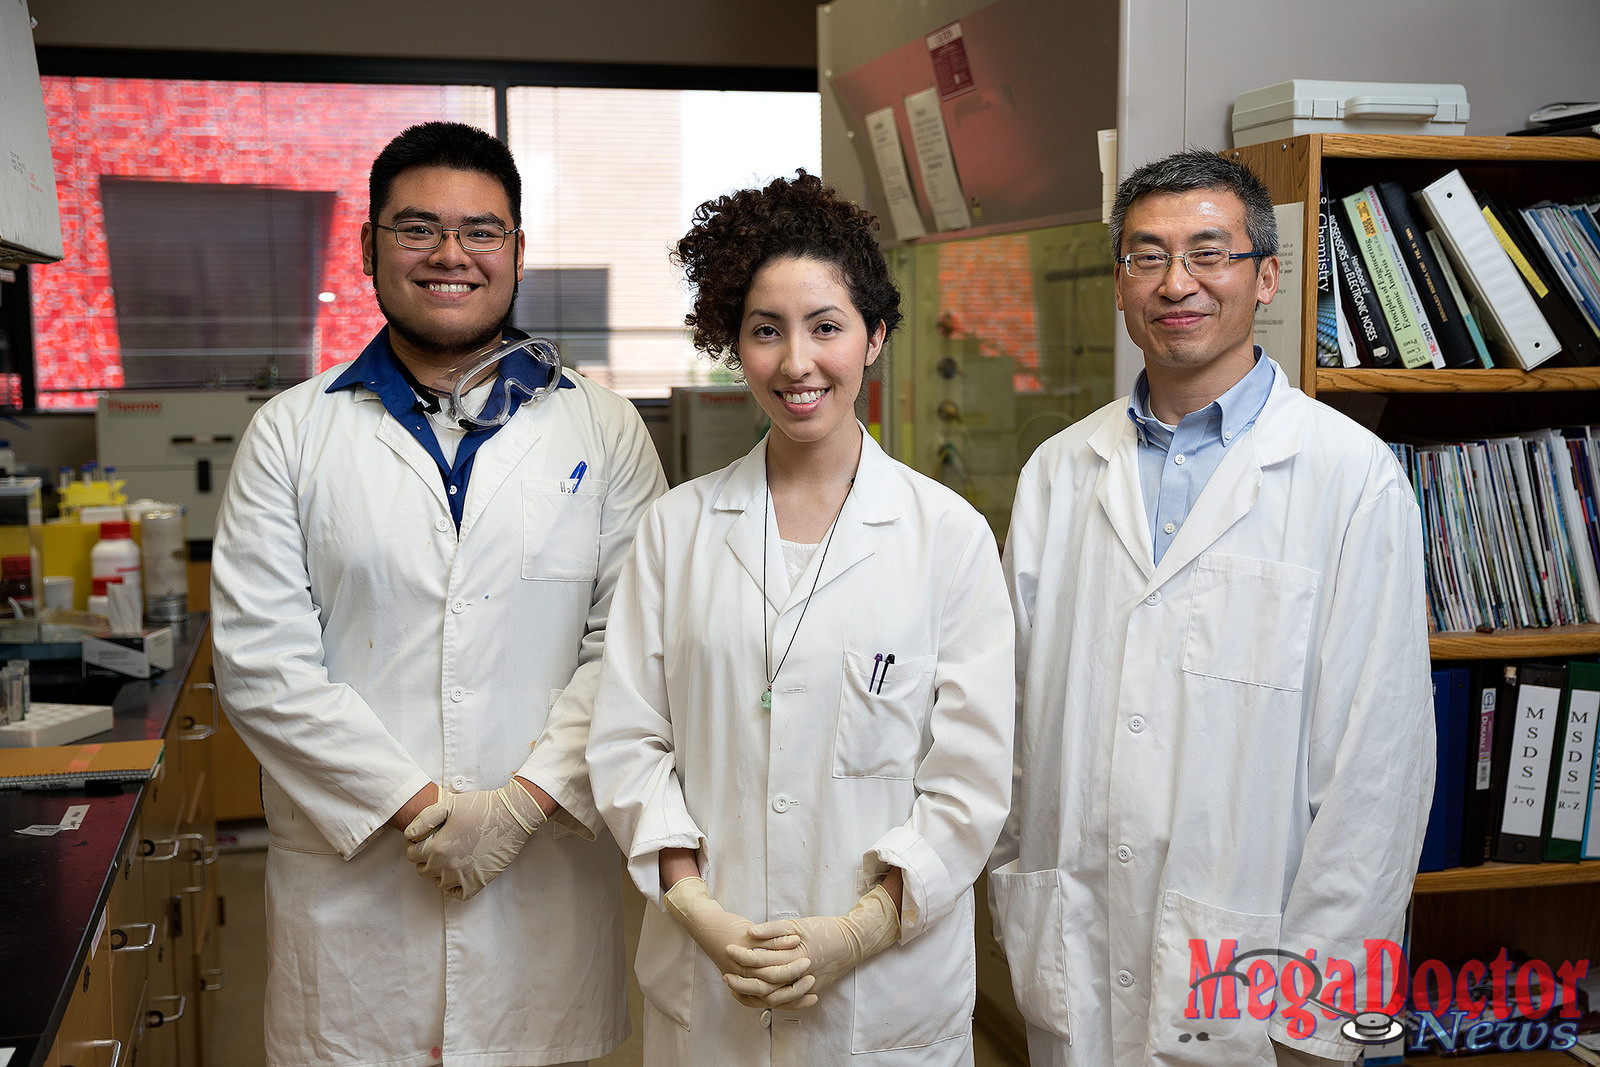 UTRGV junior biology major Andy Nguyen, senior chemistry major Itzel Lopez, and Dr. Yuanbing Mao, program director of Integrating Food Science/Engineering and Education Network, do food science research on the UTRGV Edinburg Campus as part of the IFSEEN collaborative program sponsored by the U.S. Department of Agriculture. (UTRGV Photo by Paul Chouy)